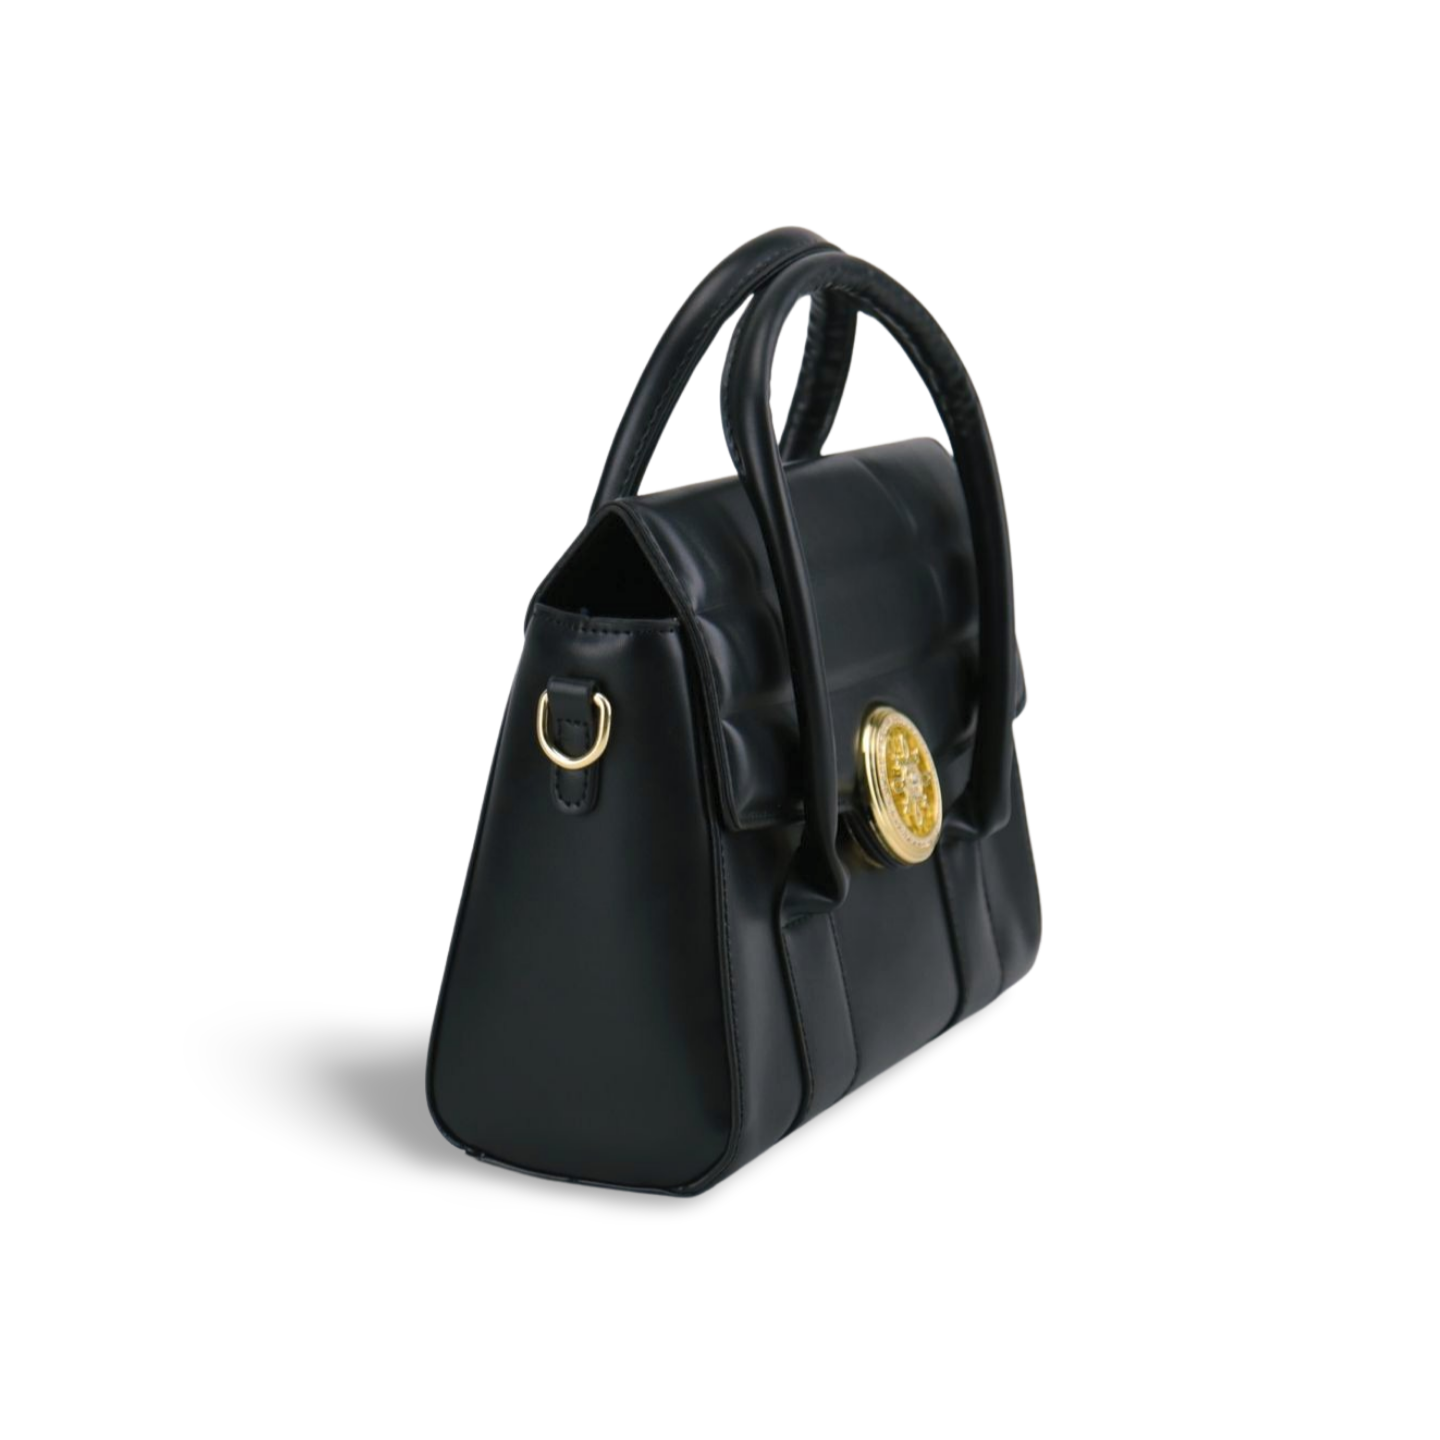 Elegant Two-Tone Satchel Purse with Gold Accents